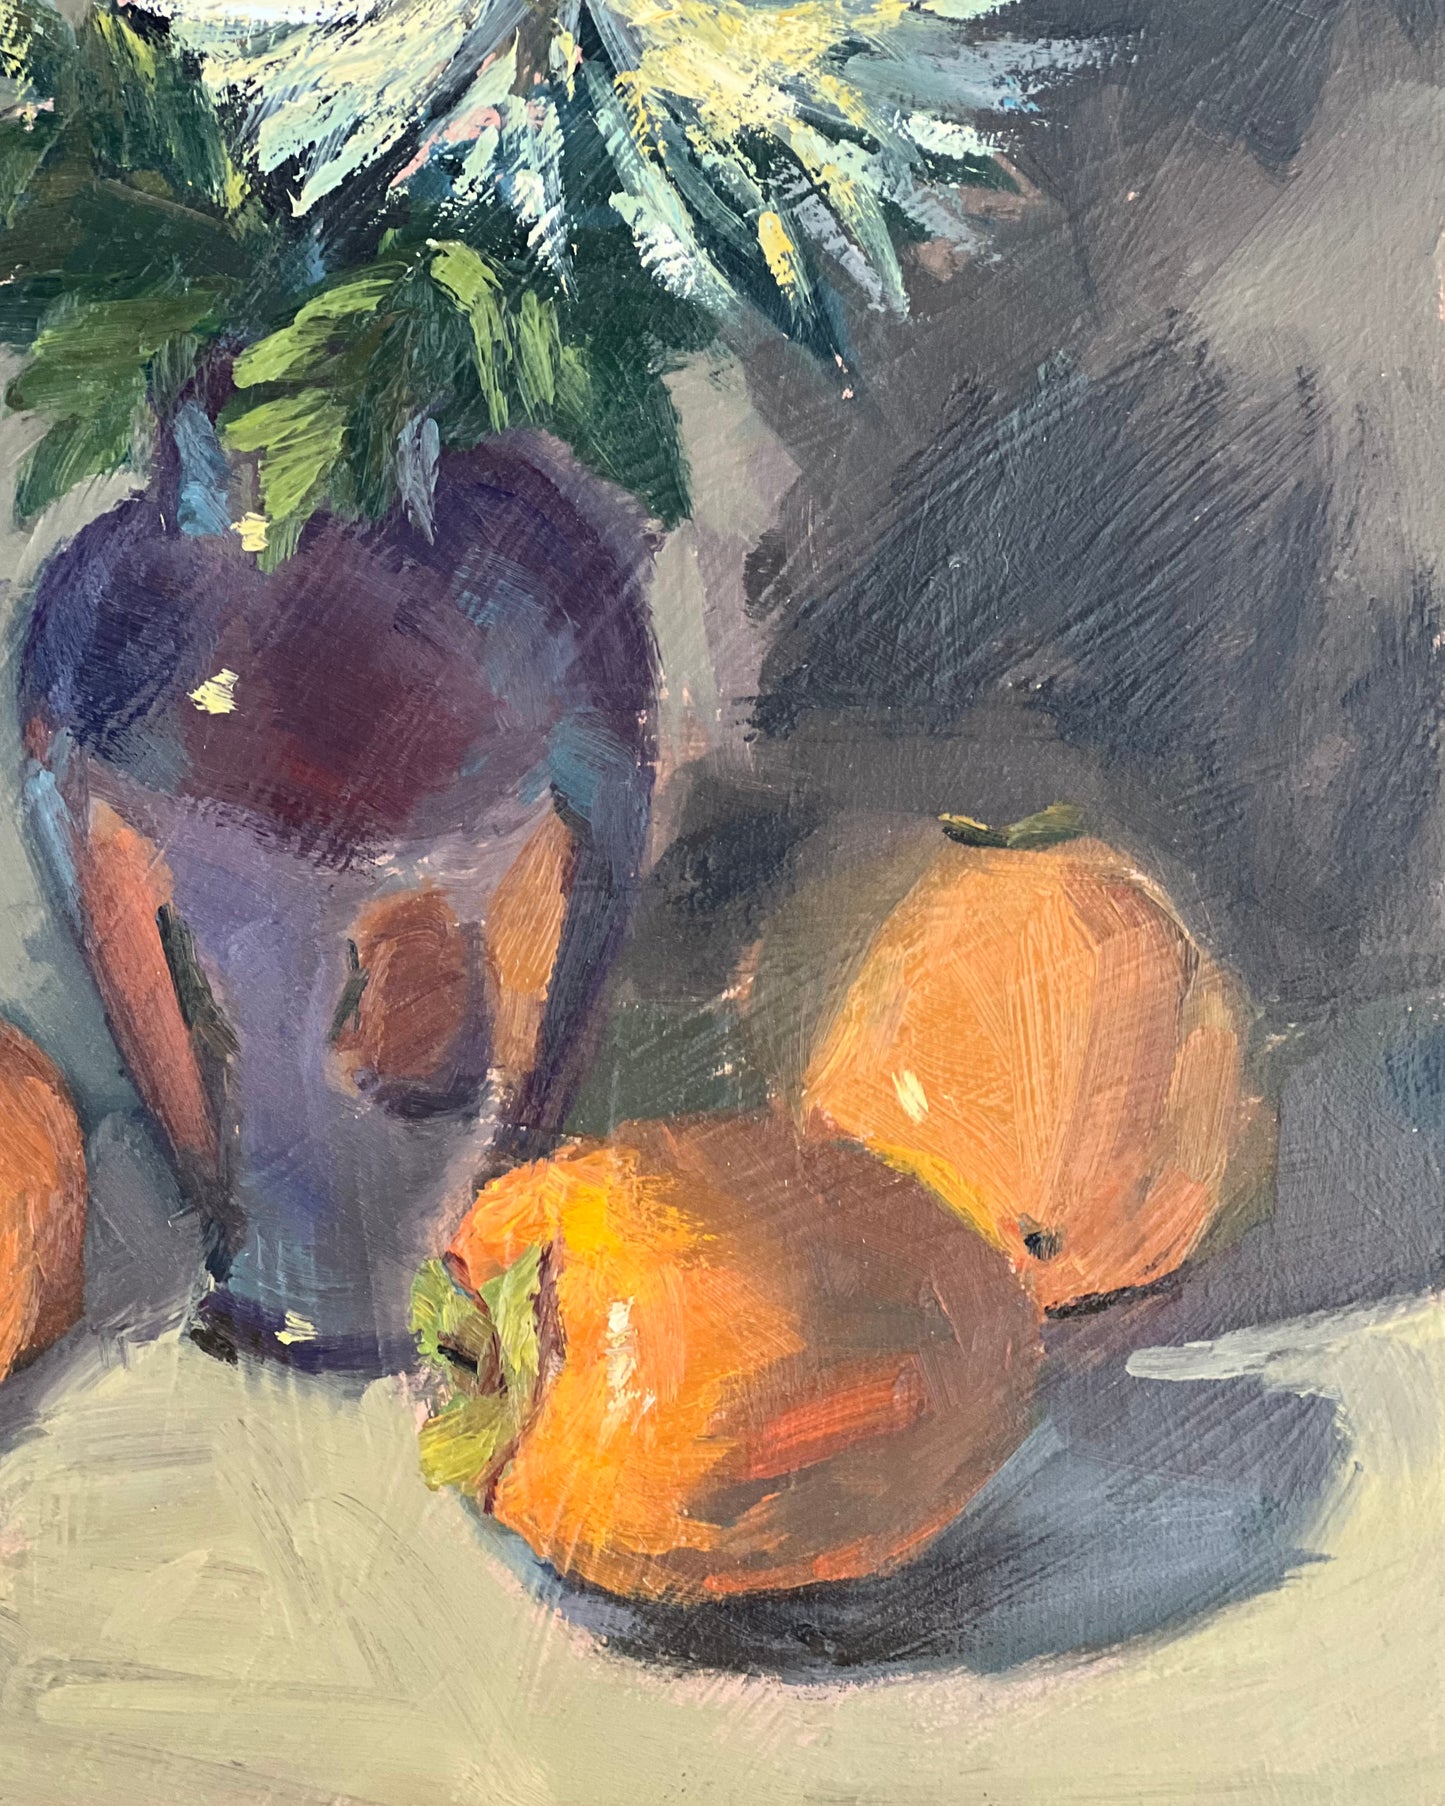 Persimmons and Mums in a vase - Original Oil Painting